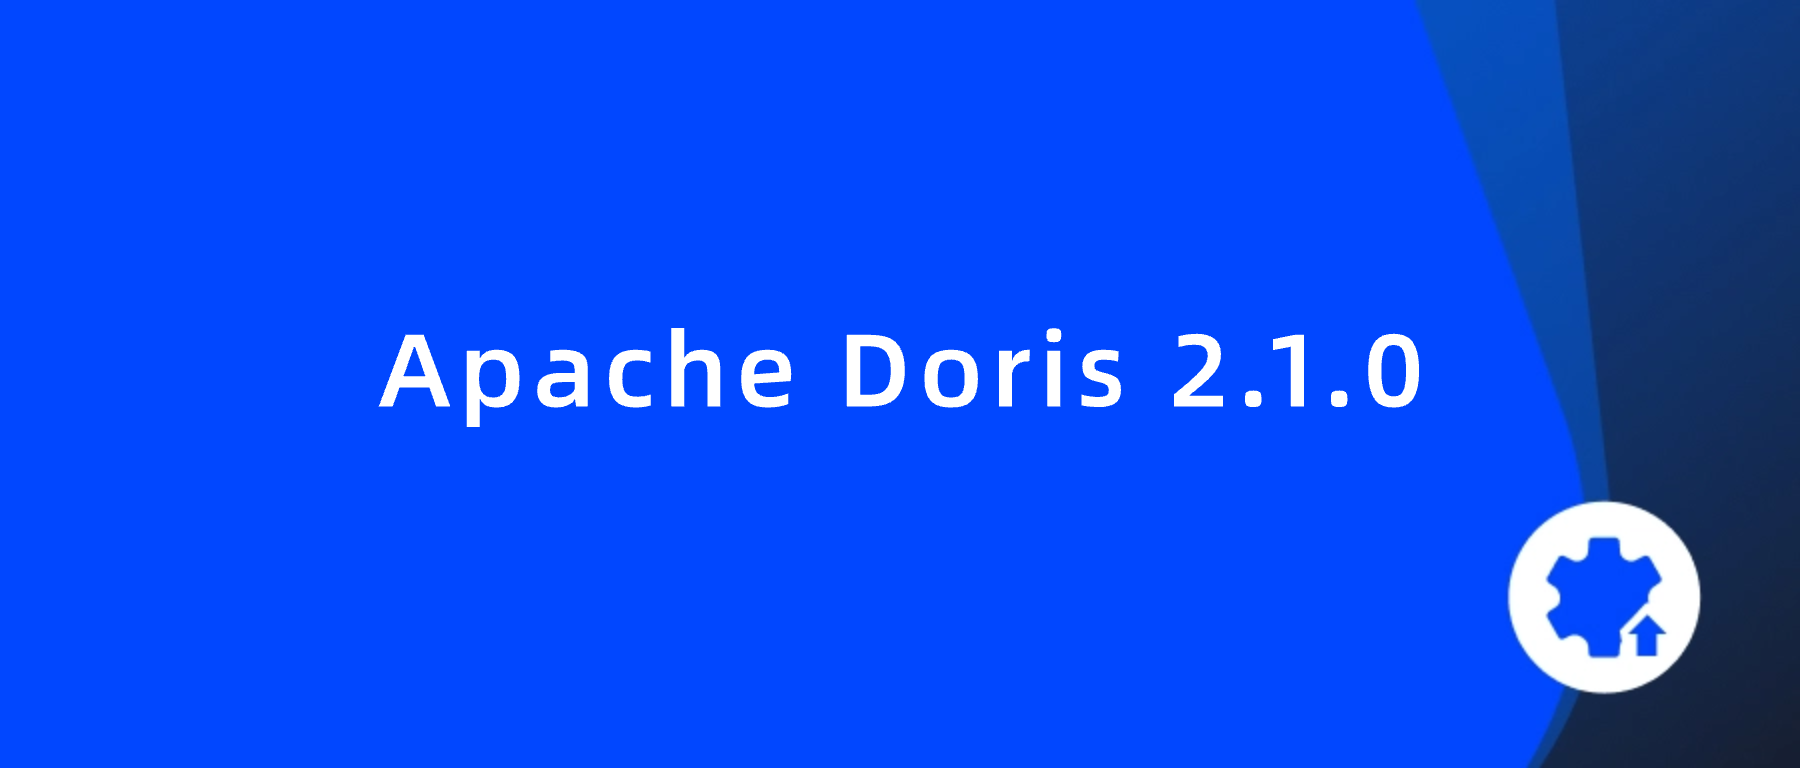 Another big leap: Apache Doris 2.1.0 is released